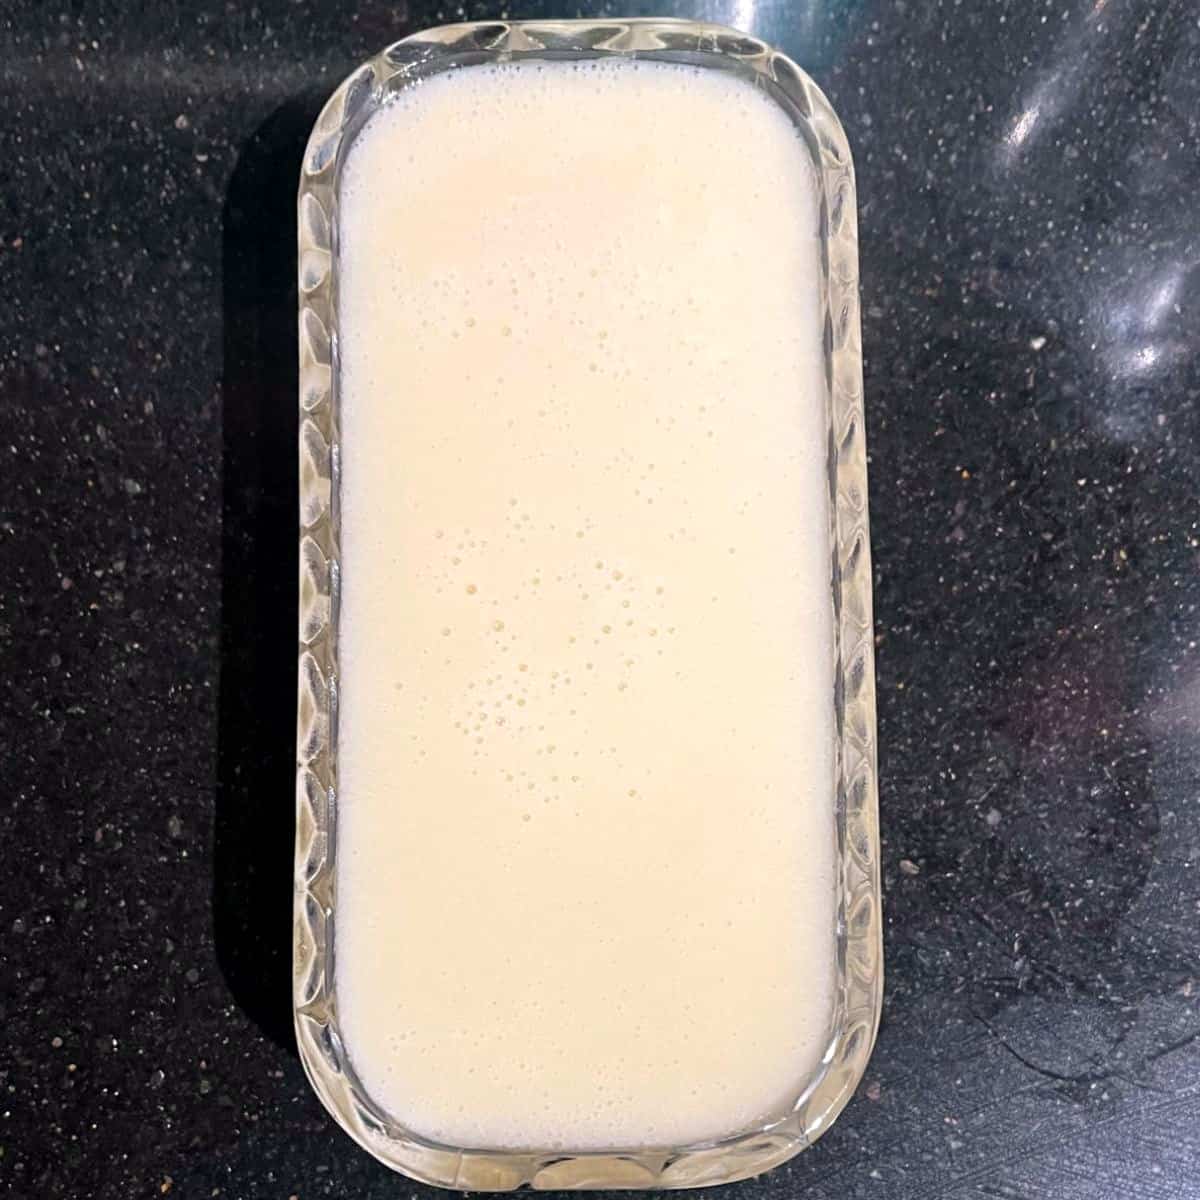 Vegan spreadable butter pours into butter dish.